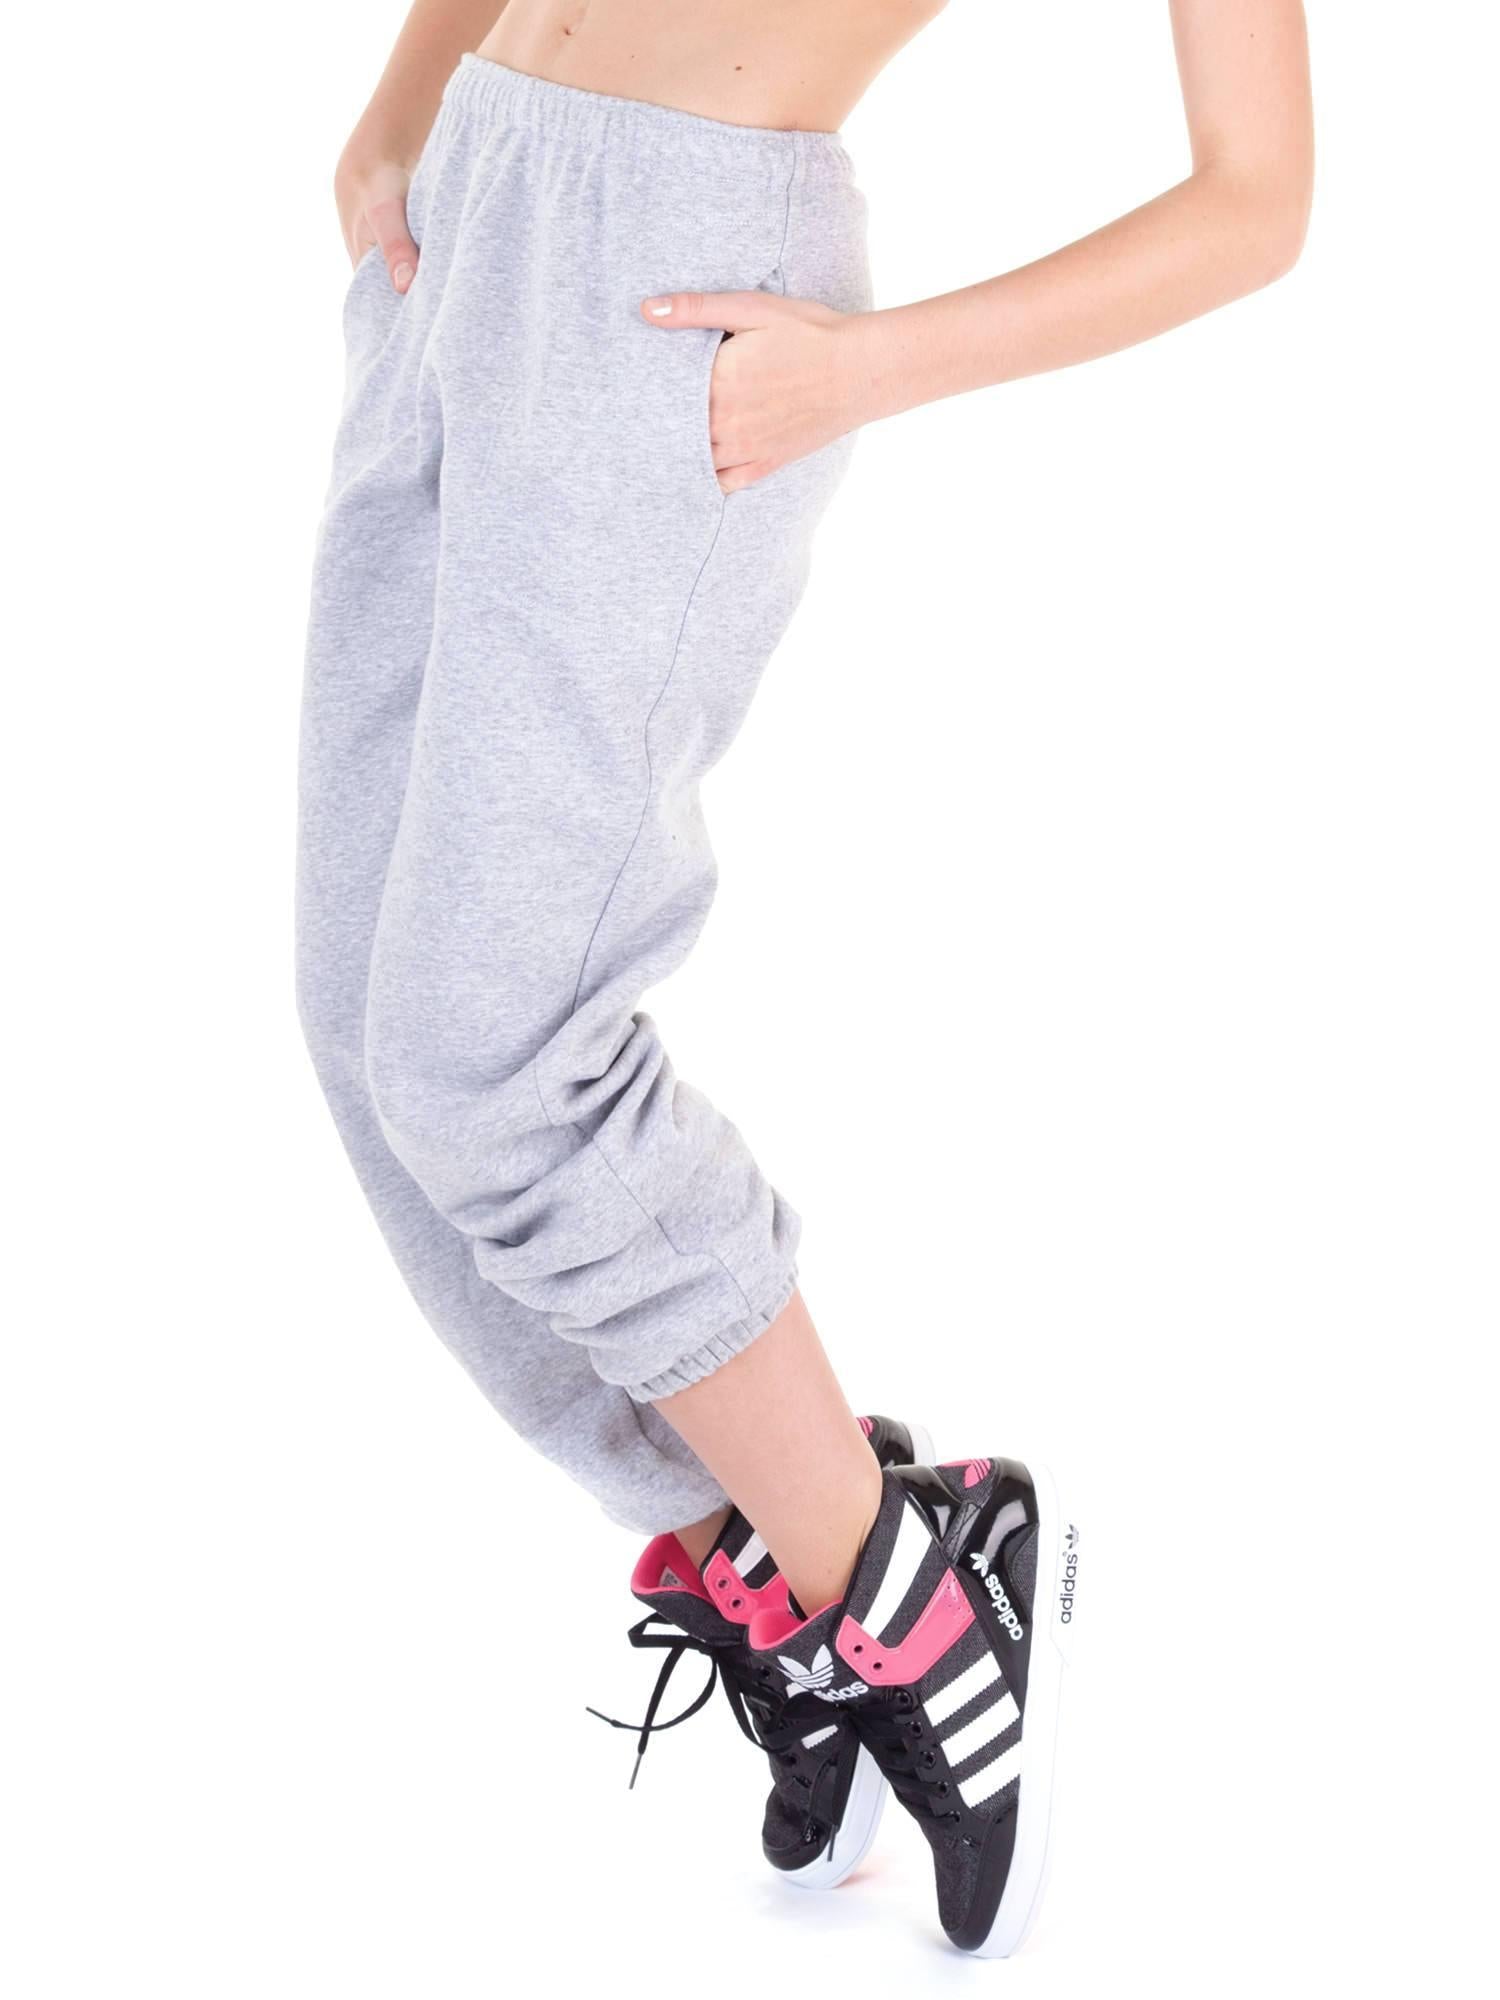 Sweat Pants Pattern for Children and Adults